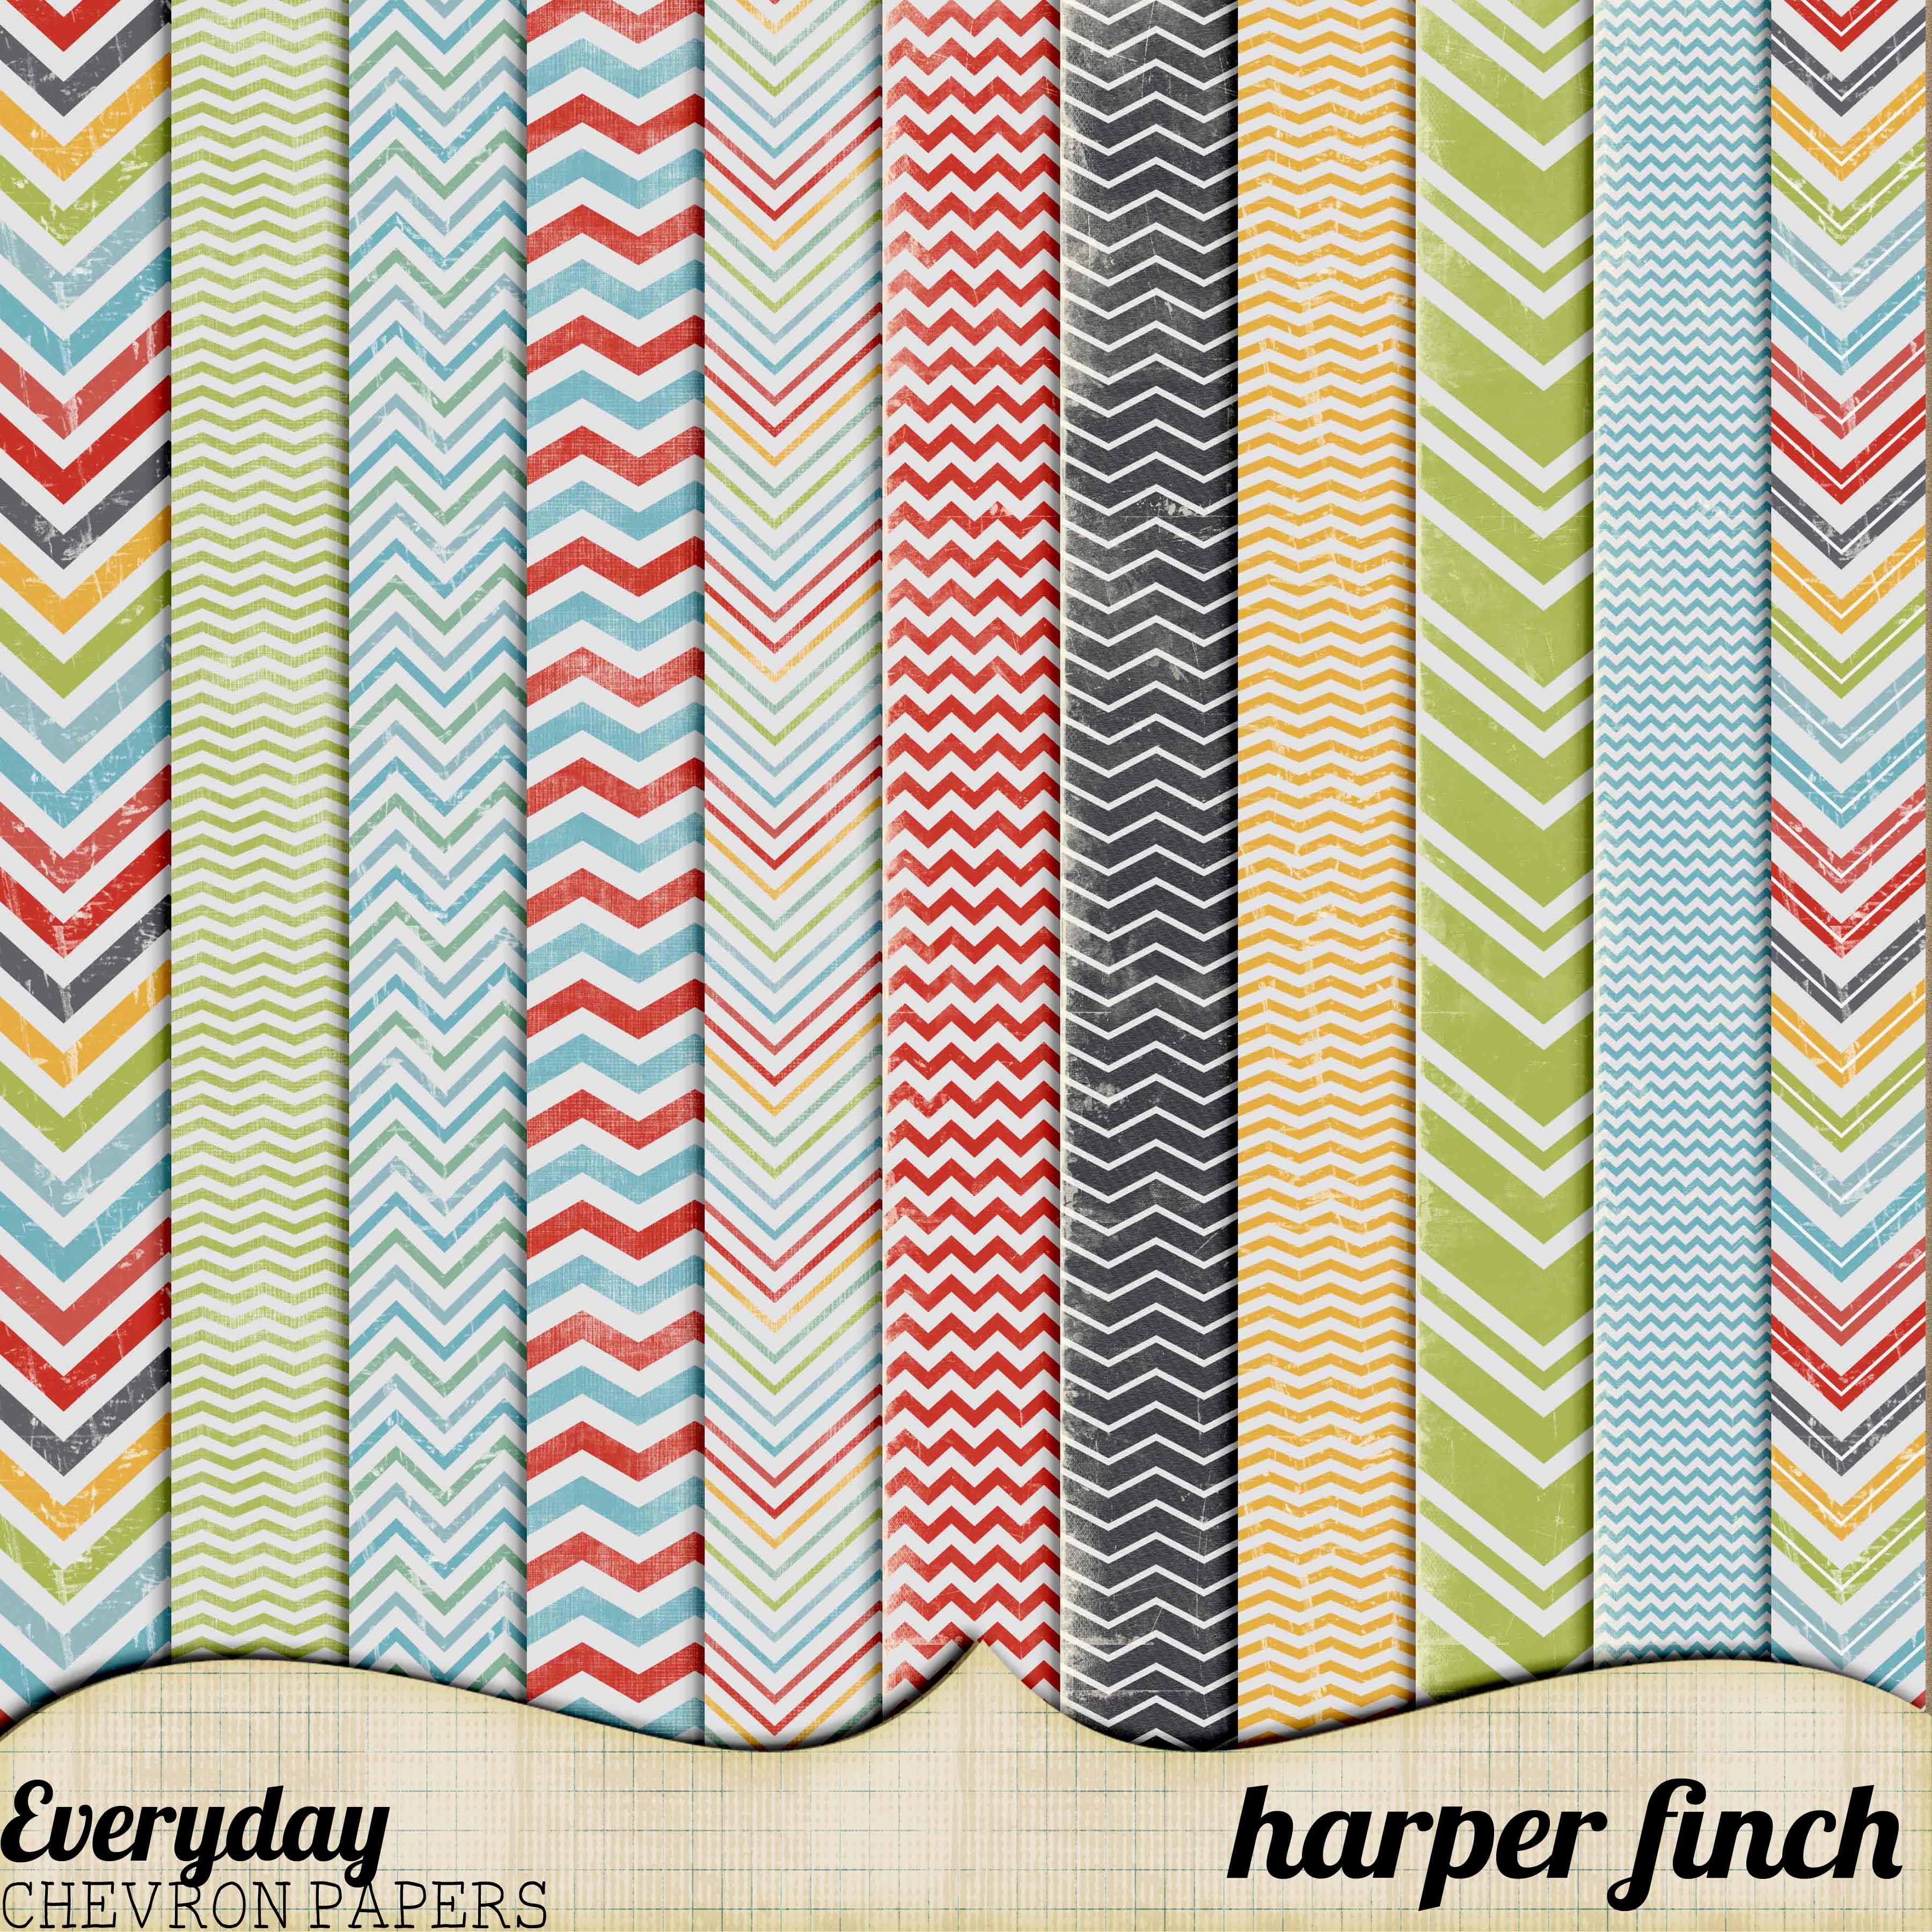 Everyday Chevron Papers by Harper Finch